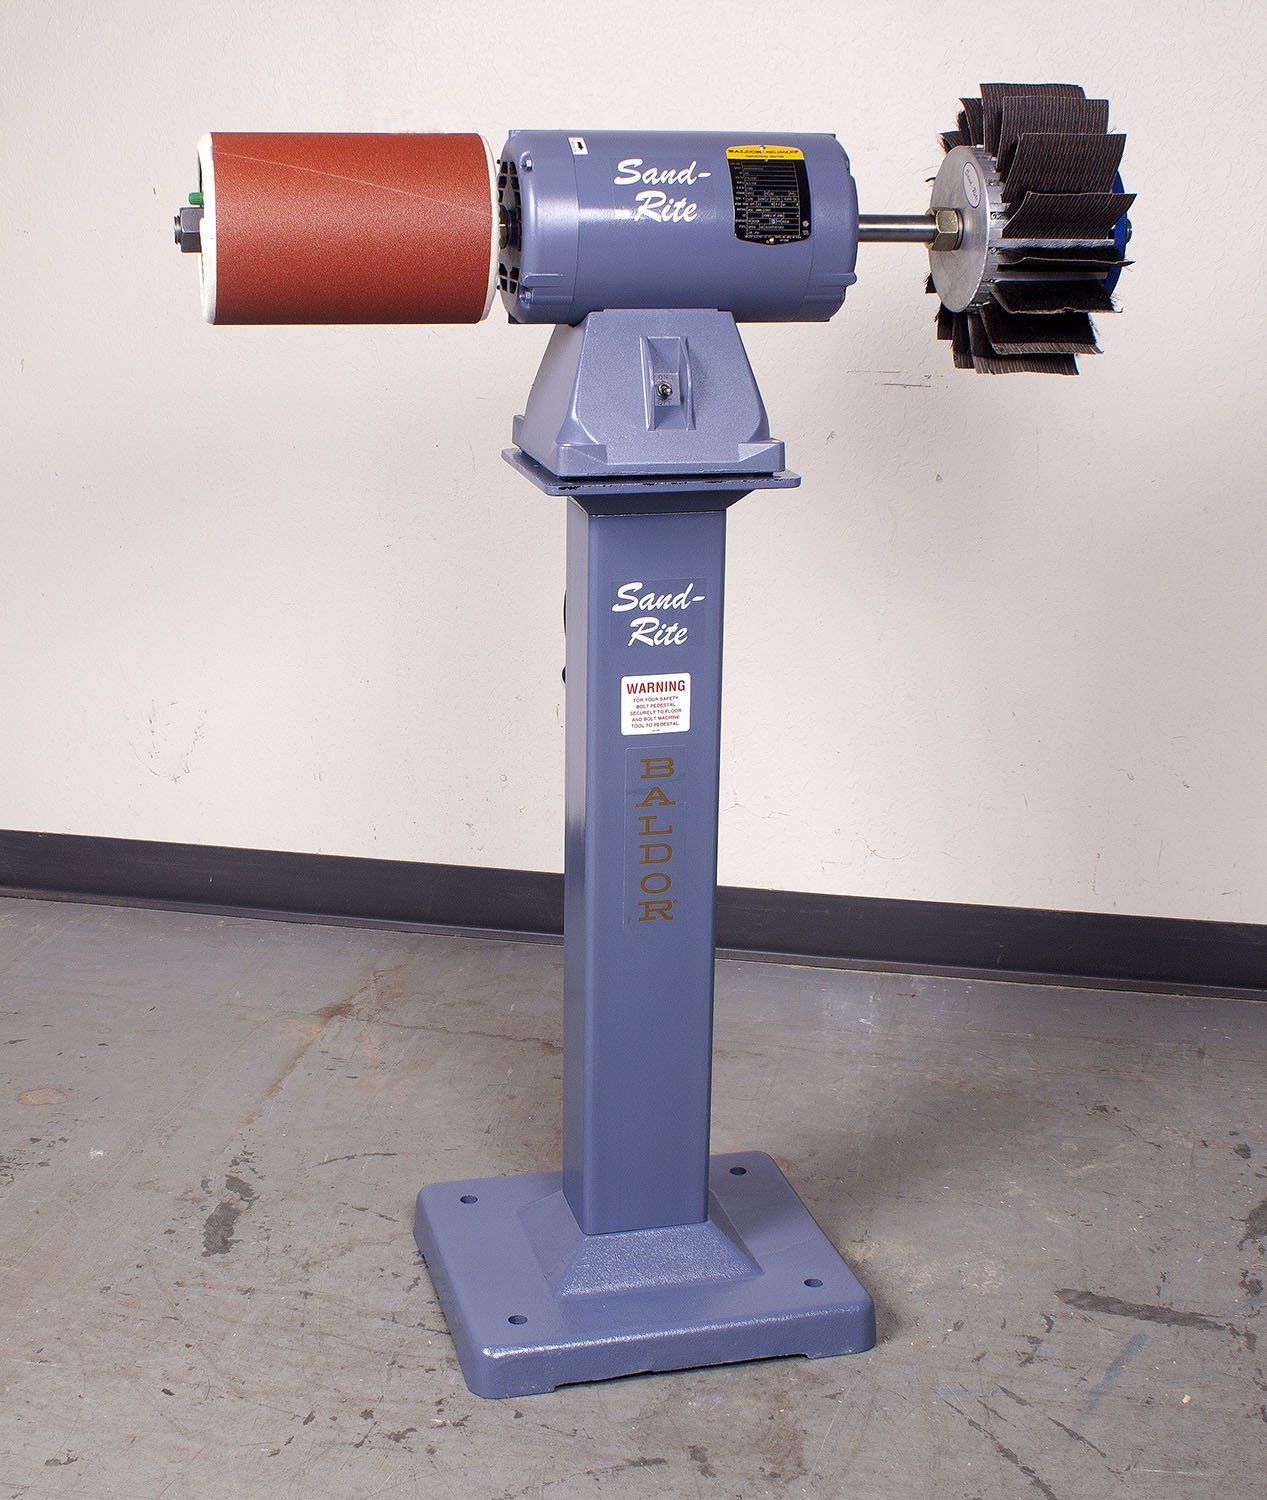 FOR THE WOODWORKING AND METAL INDUSTRIES DUO-DLX ALL-PURPOSE CONTOUR-FINISHING SANDER